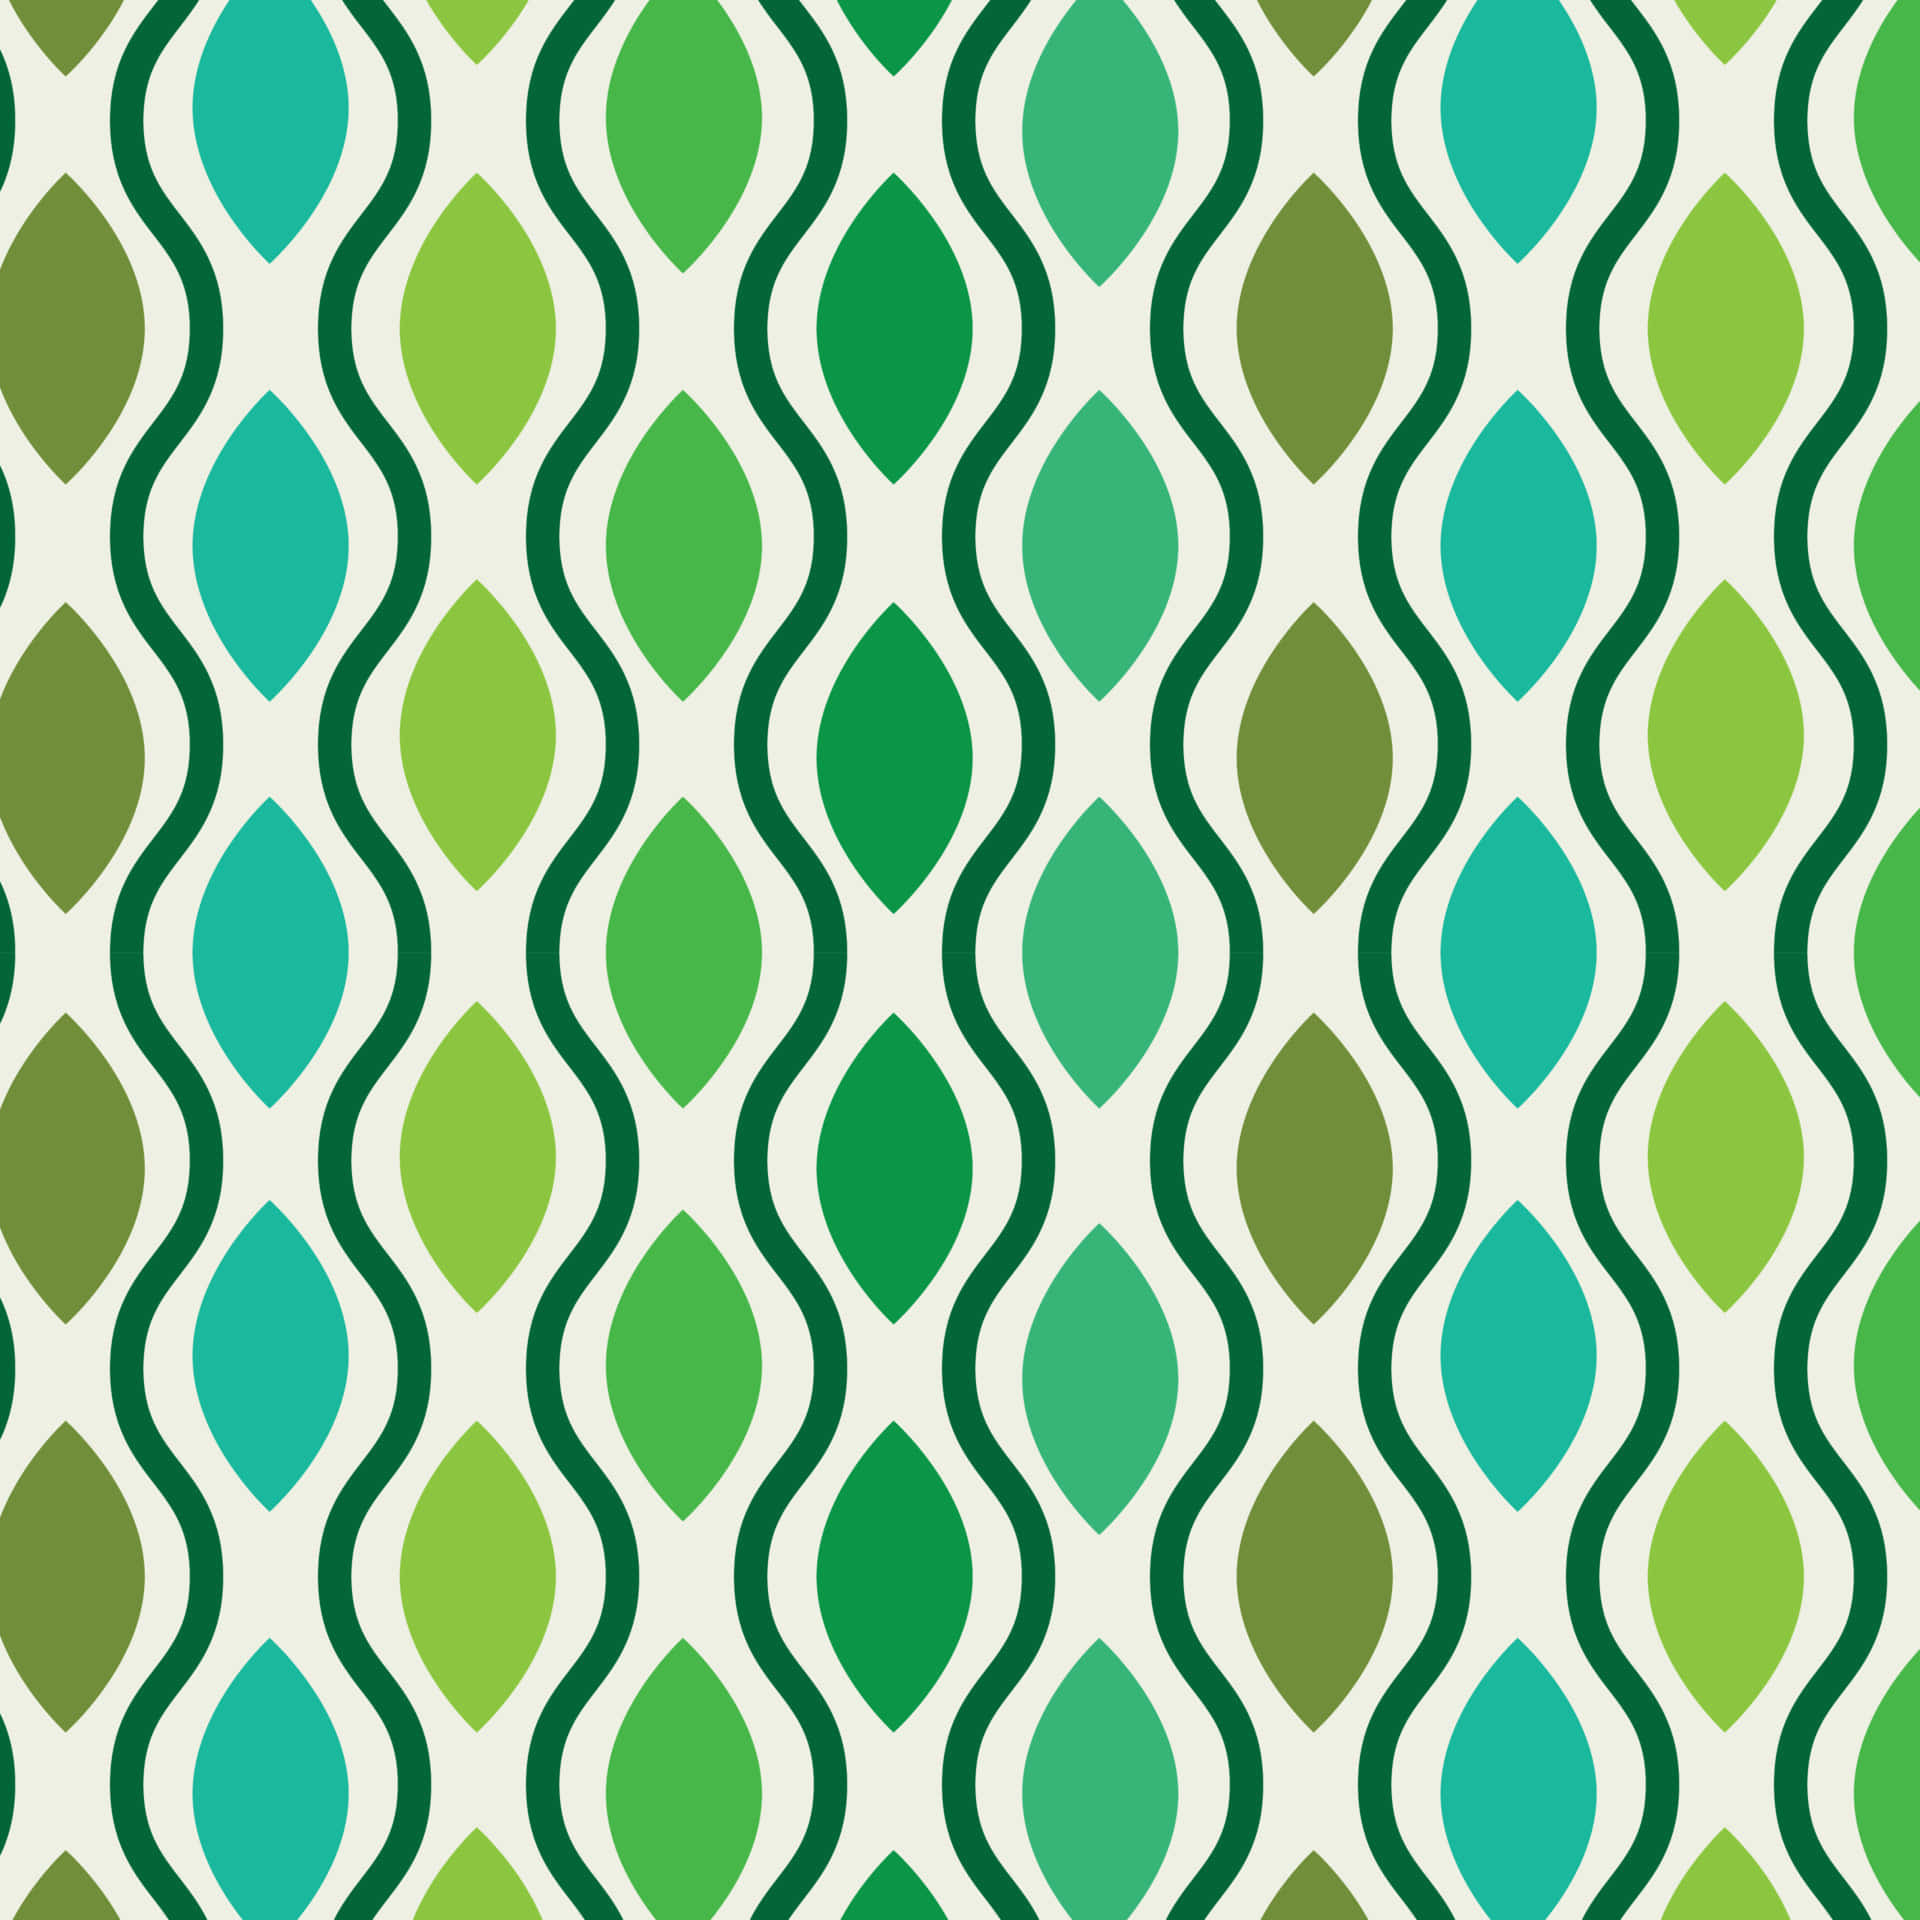 Green Oval Shapes And Curvy Lines Wallpaper